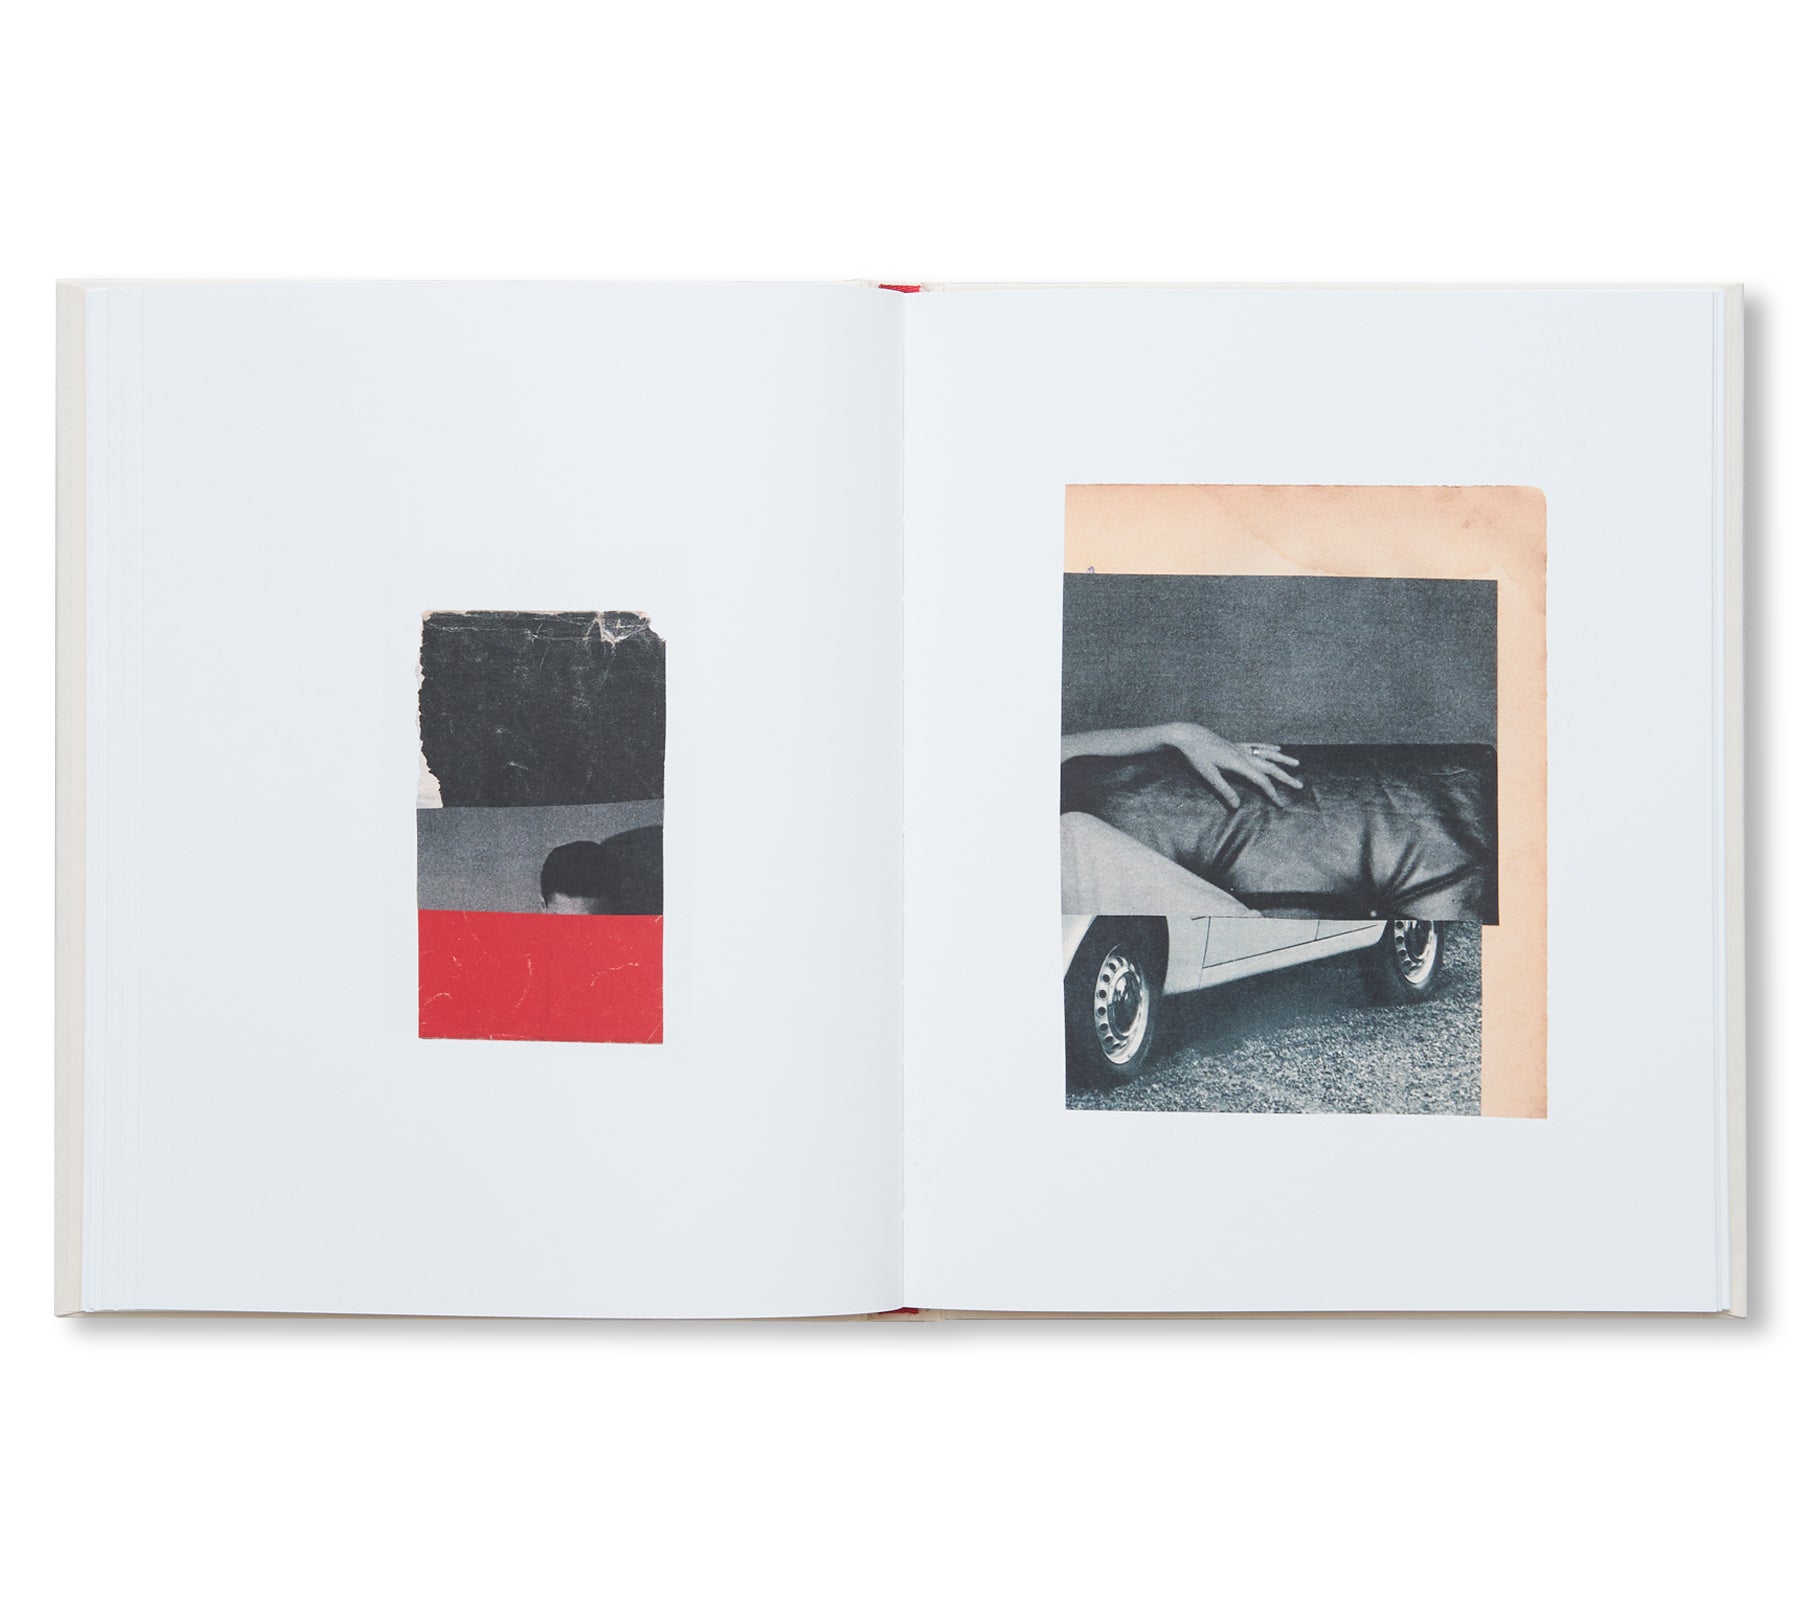 WHY I HATE CARS by Katrien De Blauwer